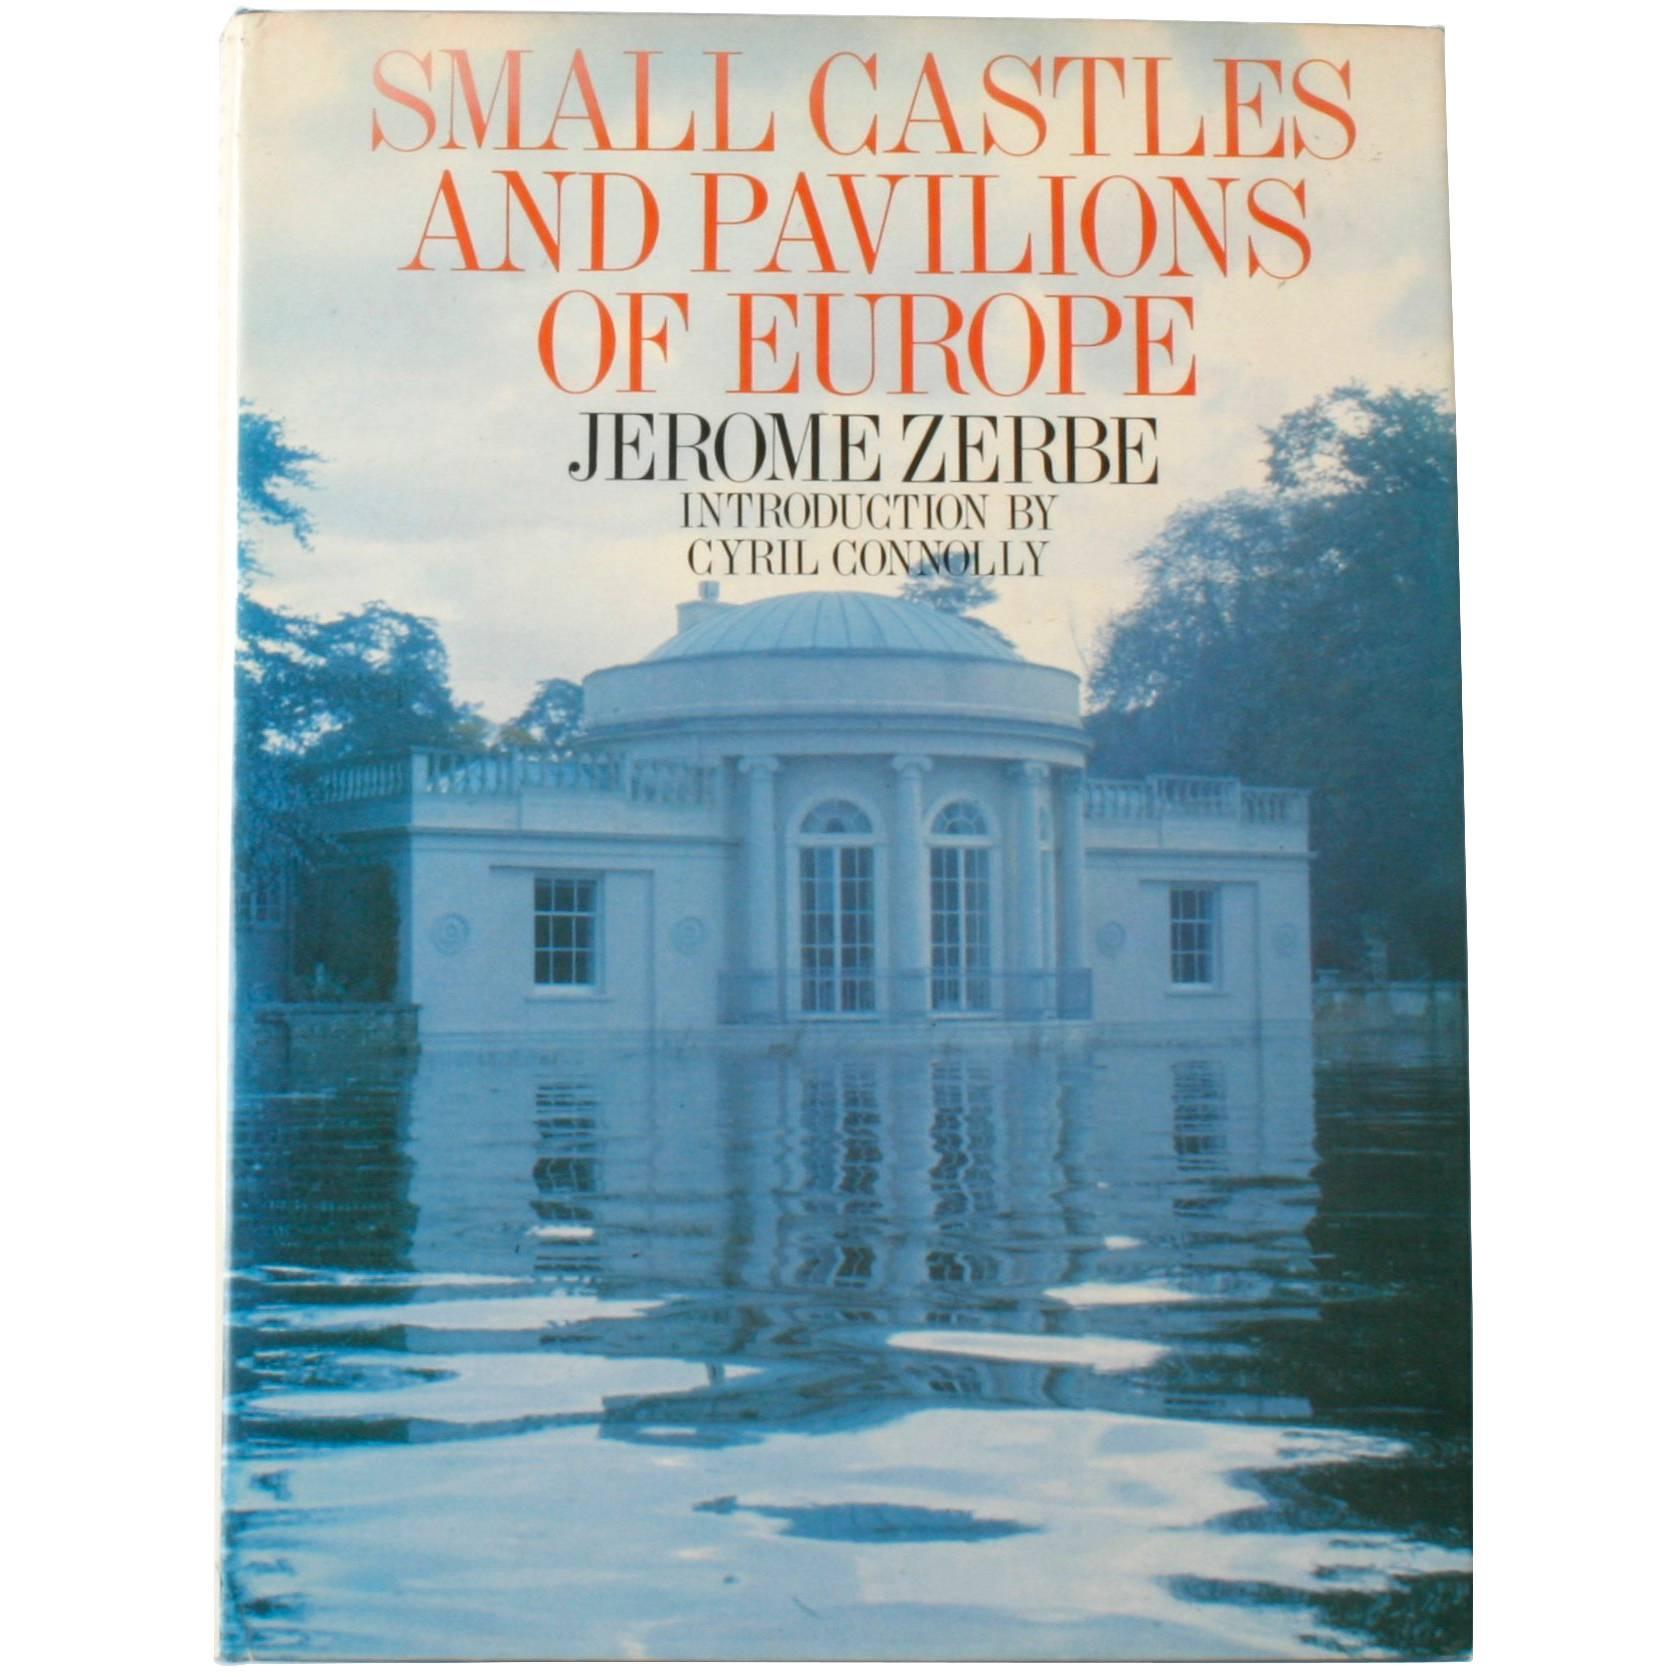 Small Castles and Pavilions of Europe by Jerome Zerbe, First Edition